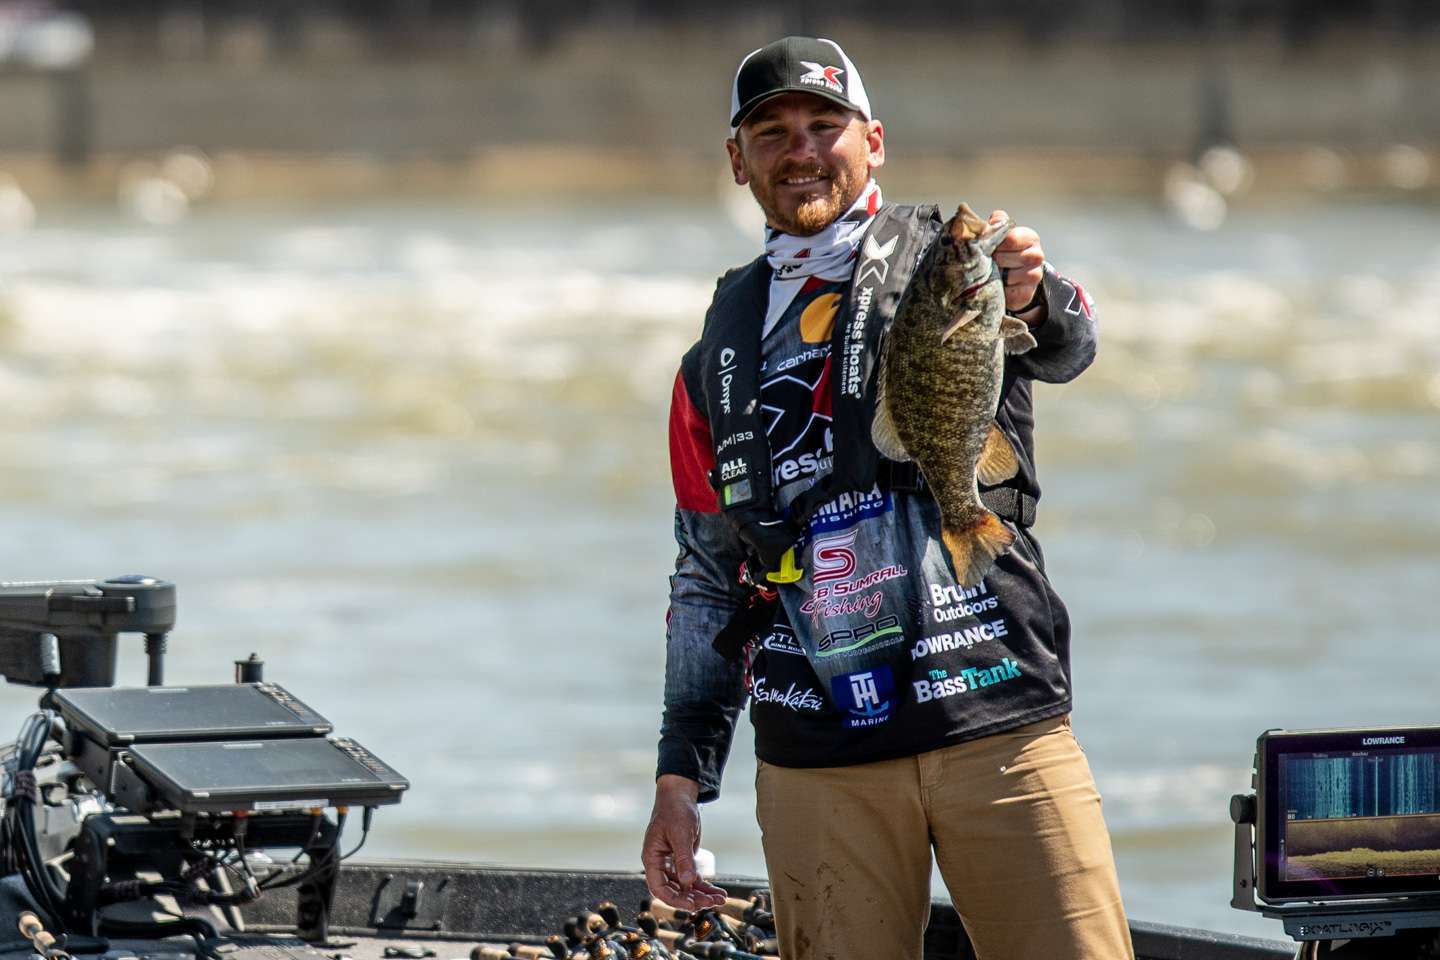 <h4>Caleb Sumrall</h4>
New Iberia, Louisiana<br>
Qualified via the 2021 Bassmaster Elite Series  <br>
2021 AOY Rank: 7 (659 points)
